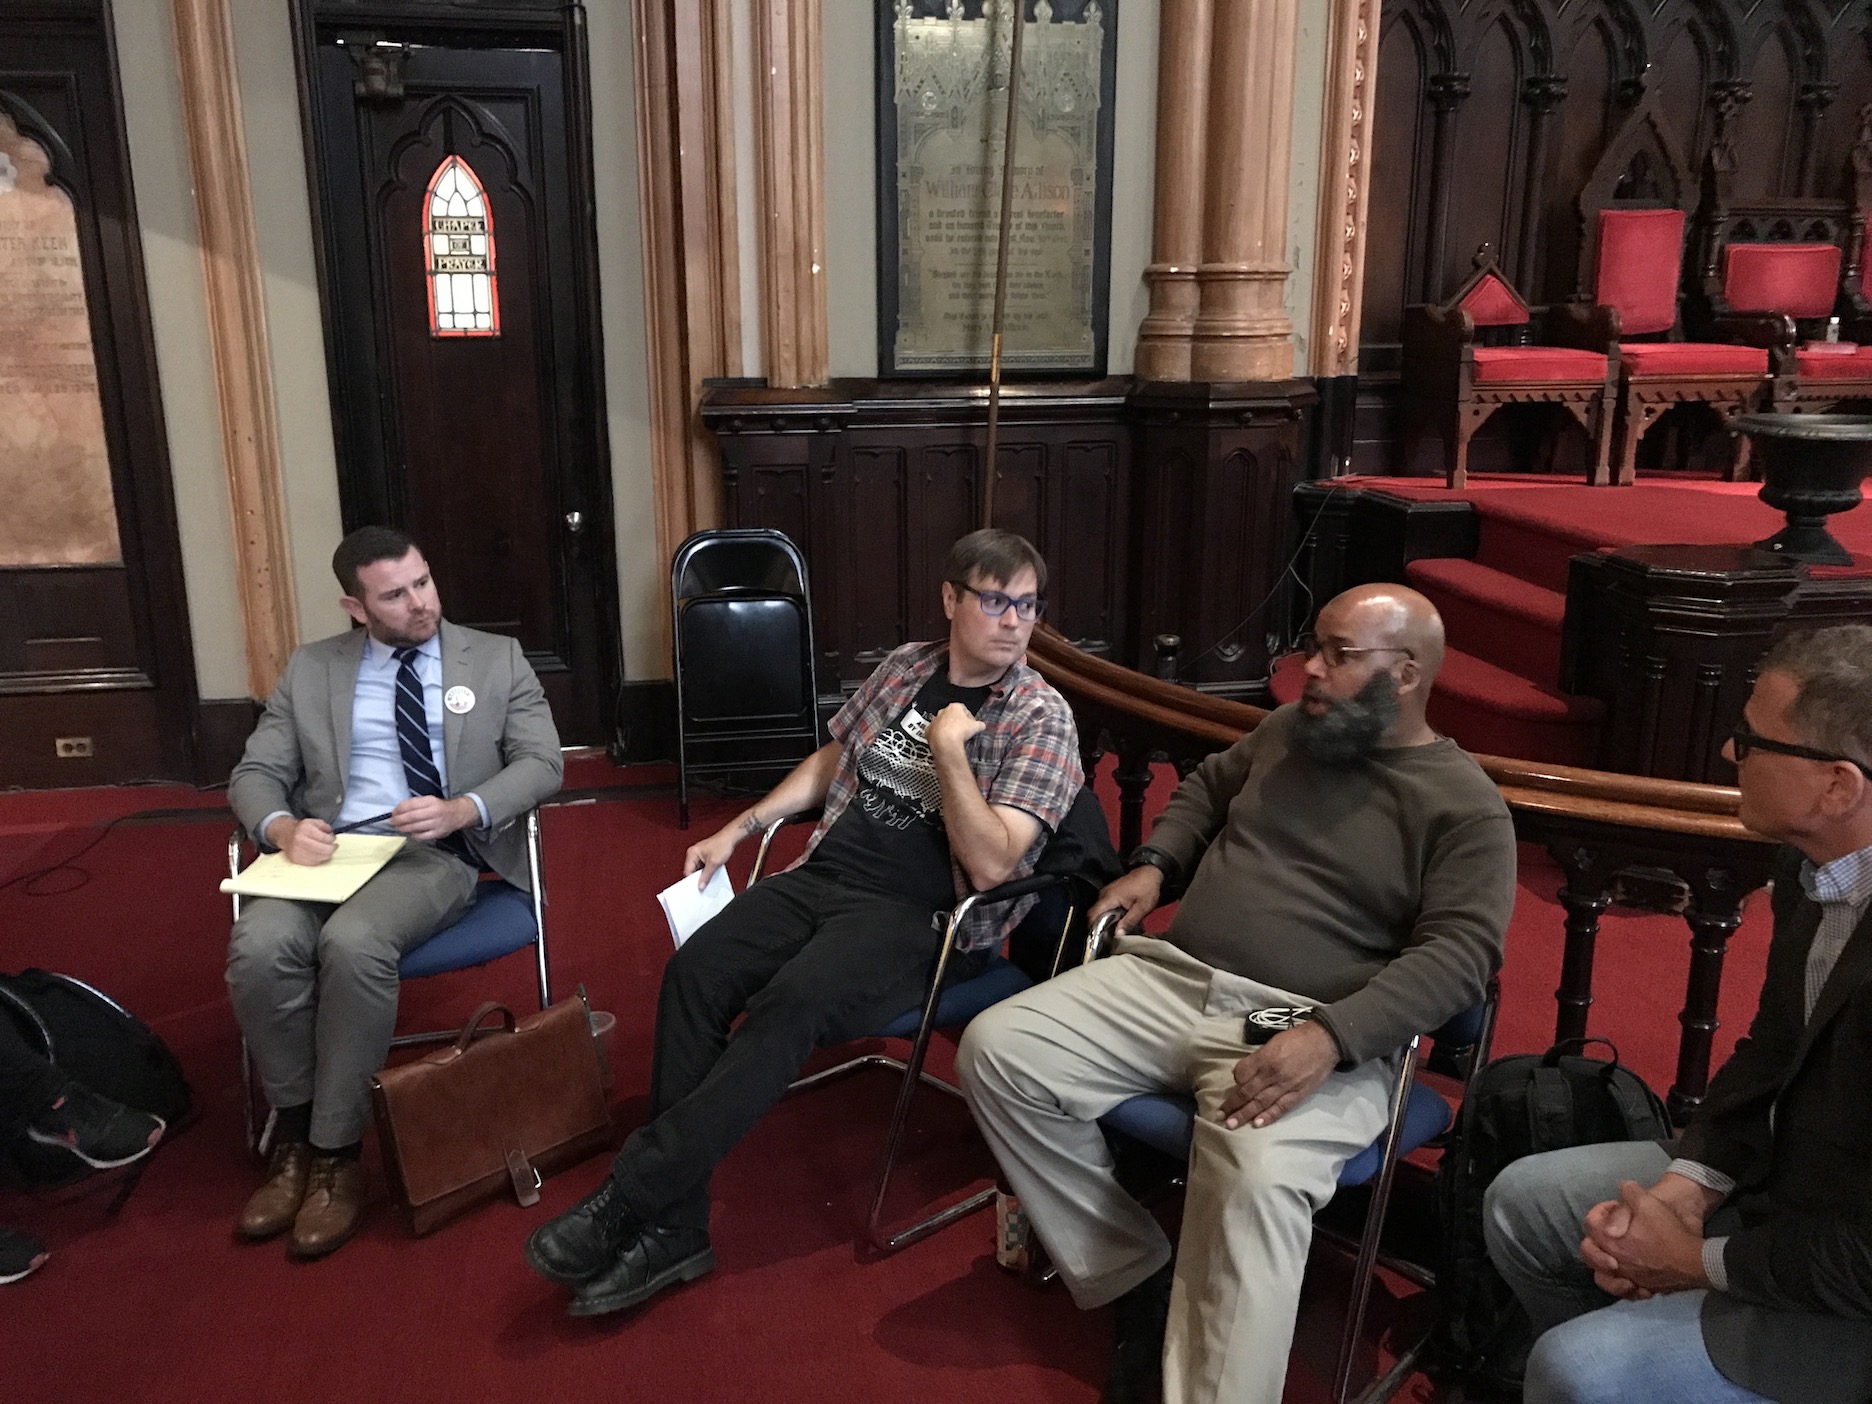 Former Juvenile Lifer Sharif Boyd speaks about sentencing policy at a meeting Amistad Law Project organized with Philadelphia DAâs Office staff.